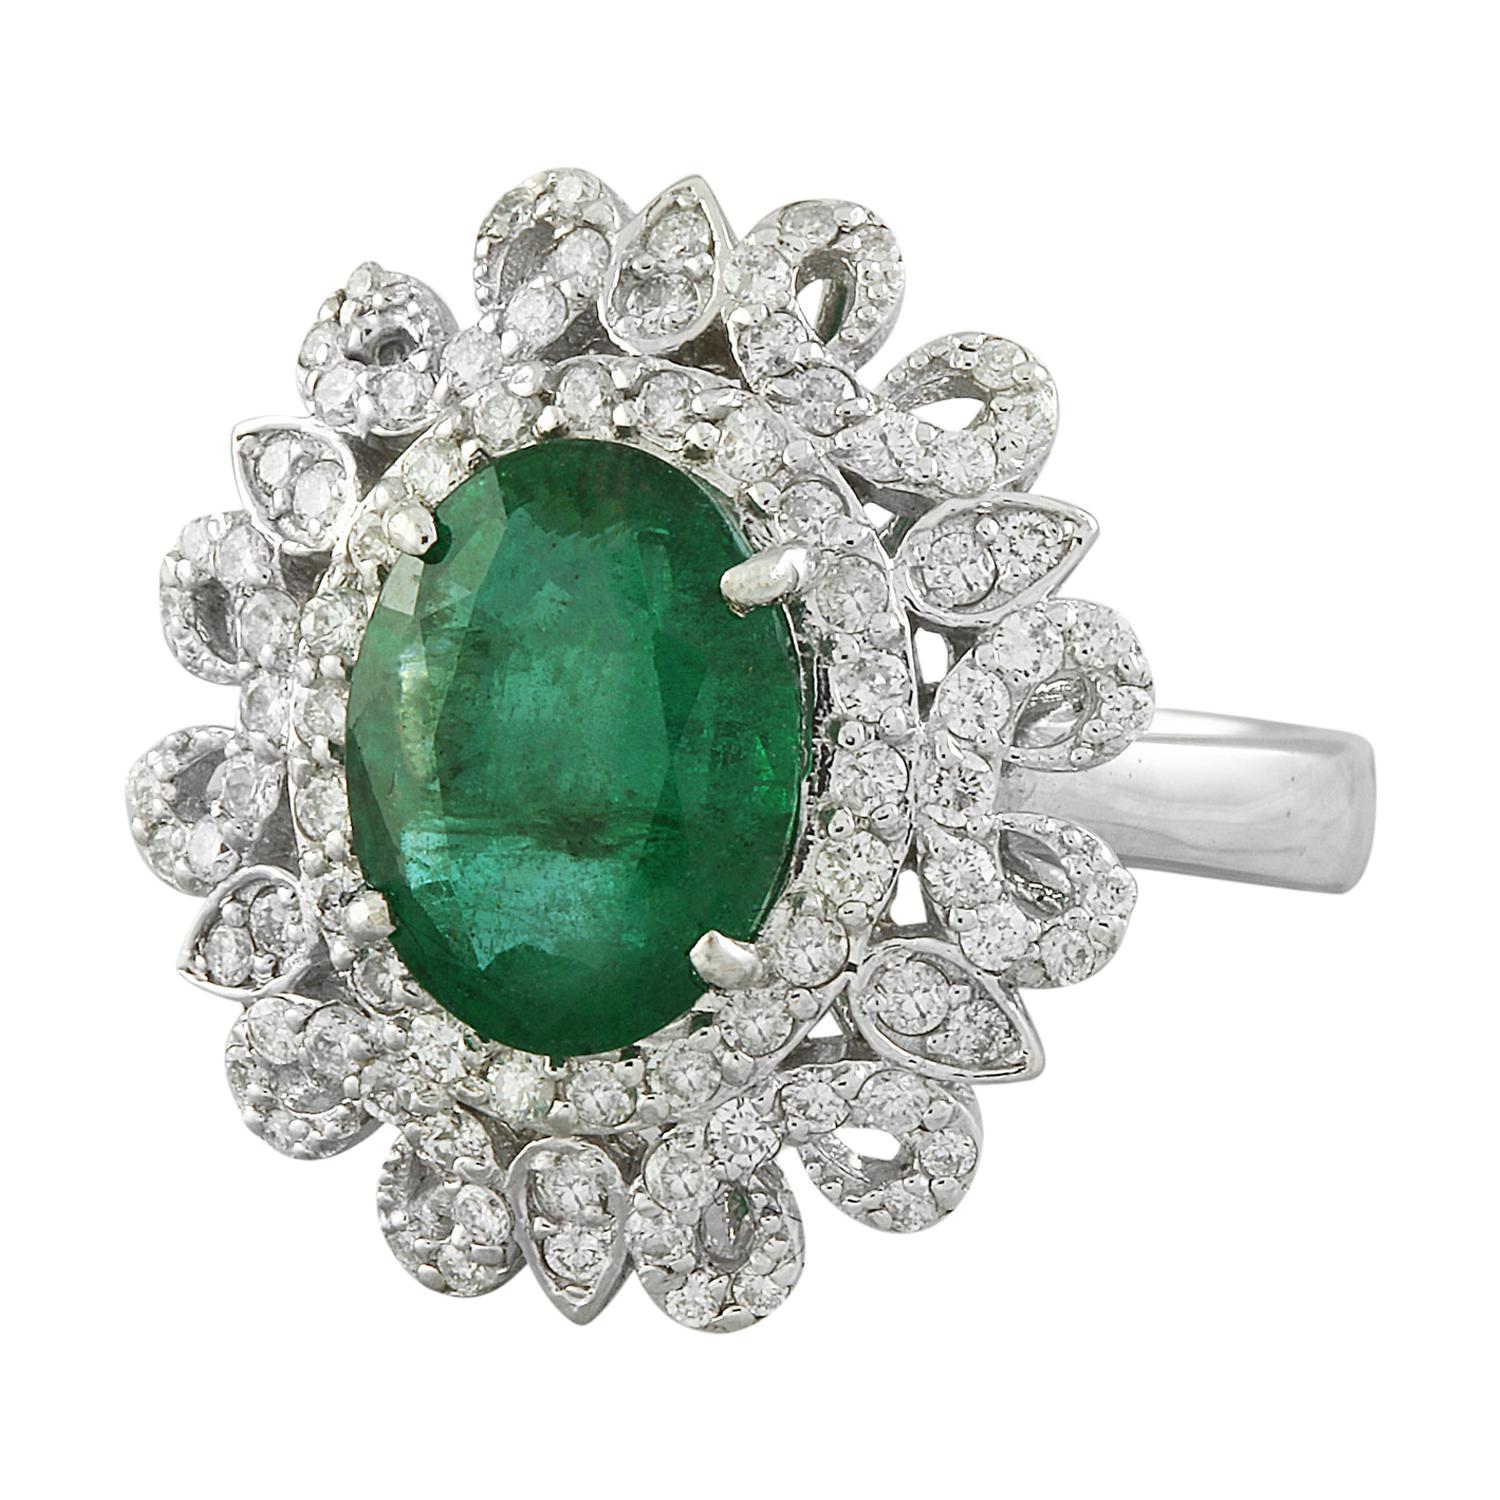 Introducing our exquisite 4.72 Carat Natural Emerald 14K Solid White Gold Diamond Ring. Crafted with precision from stamped 14K solid white gold, this ring boasts a total weight of 7.1 grams, ensuring both quality and longevity. The focal point of